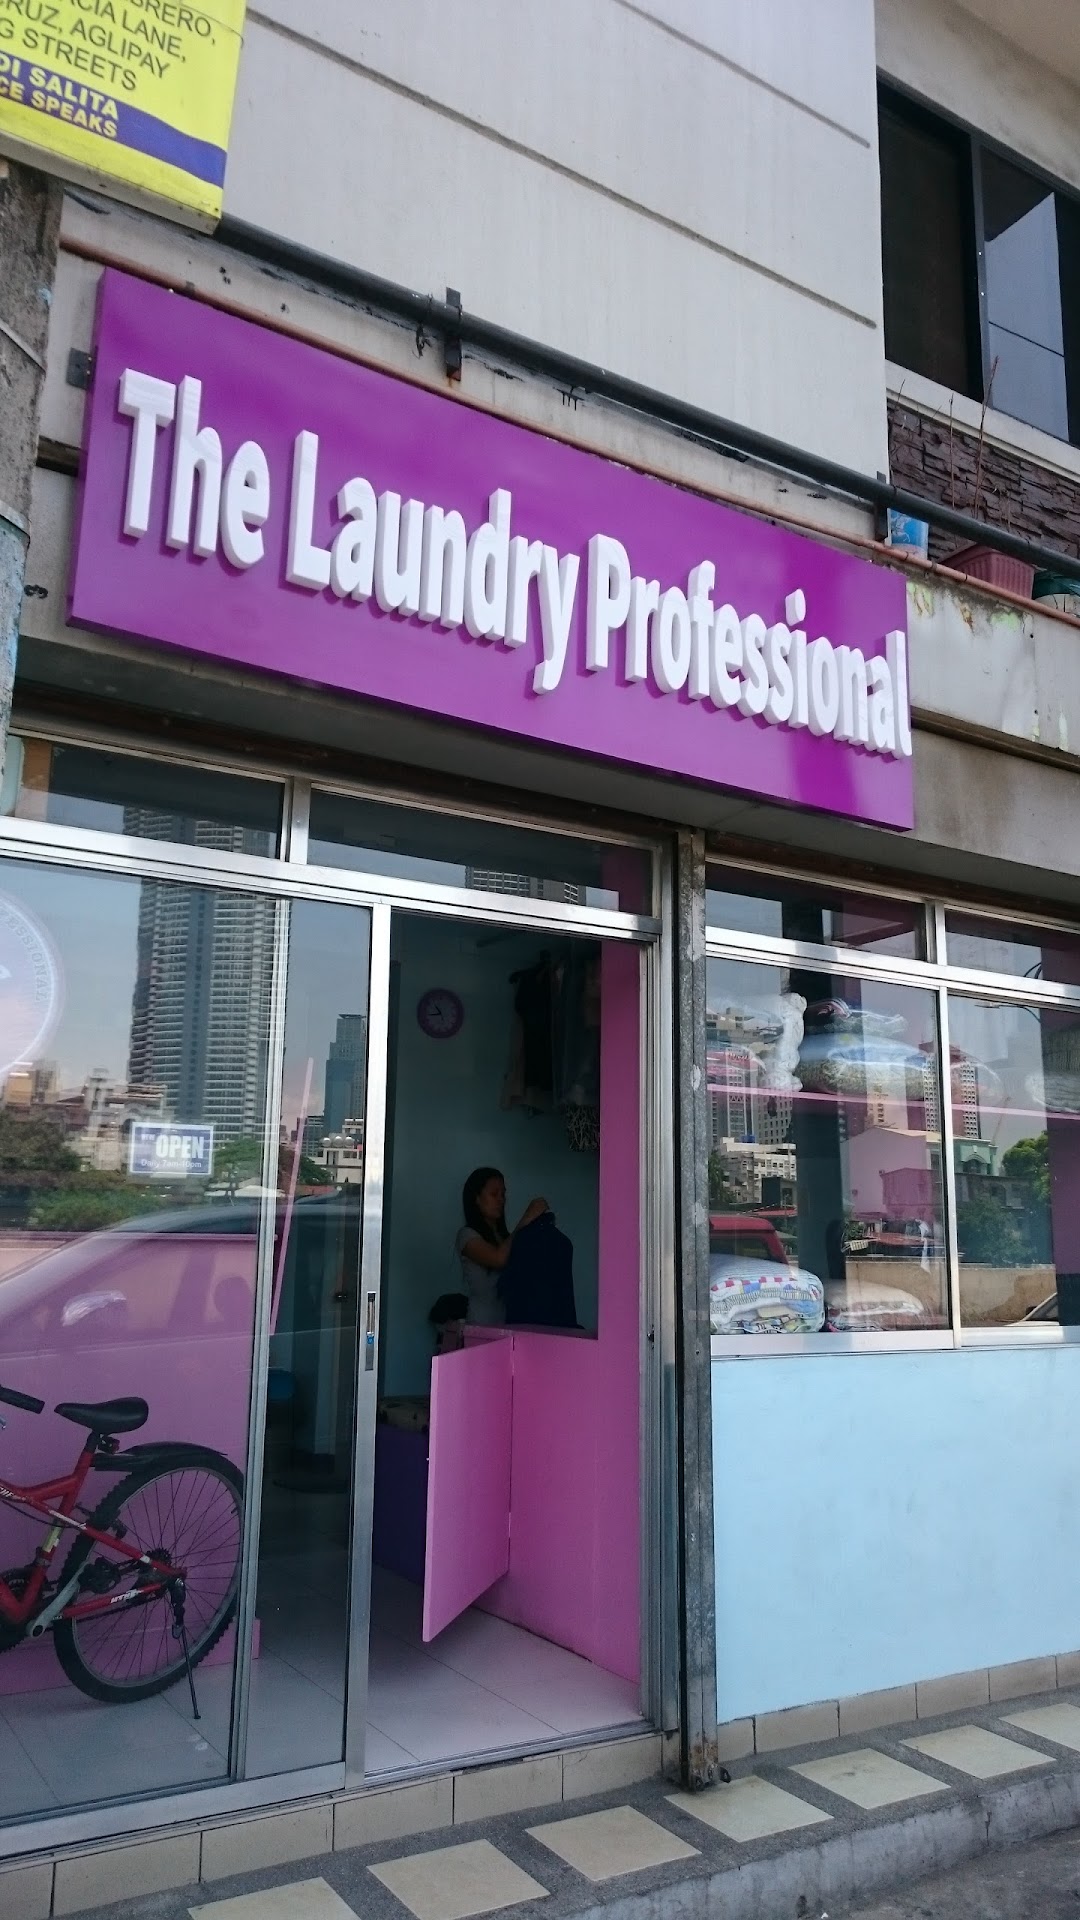 The Laundry Professional